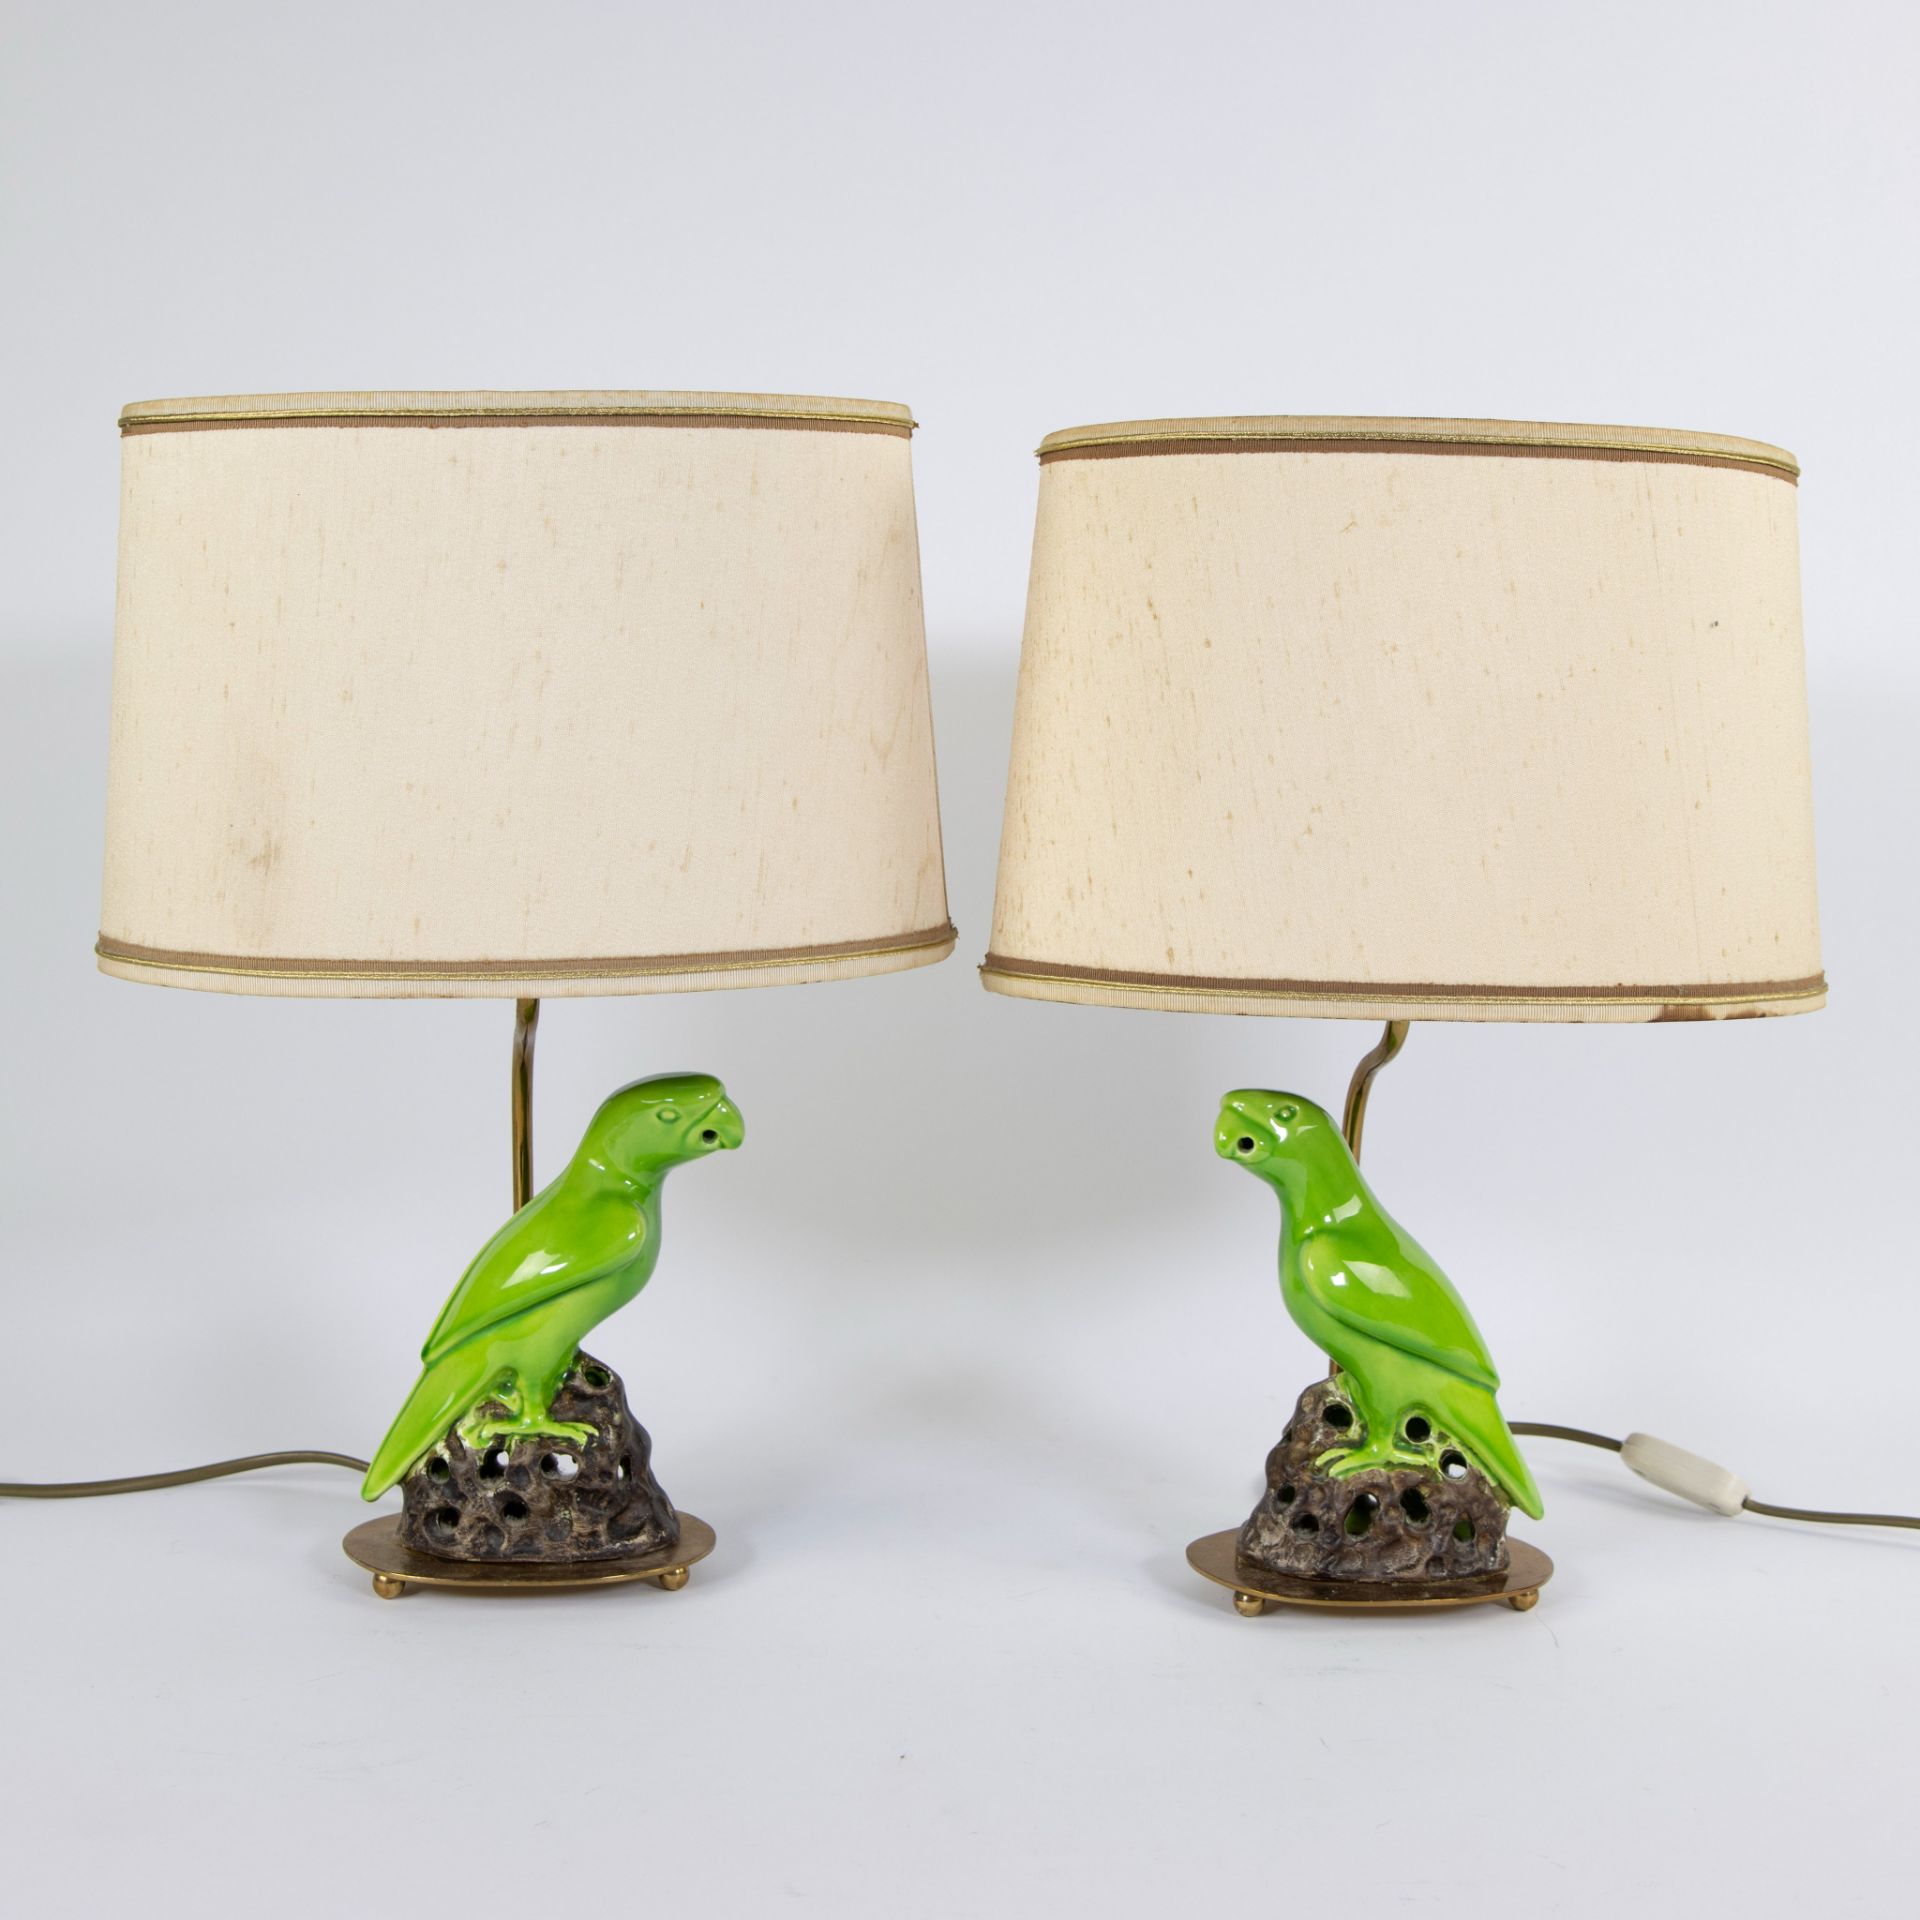 Pair of lampadaires with green glazed parrots, 1970s